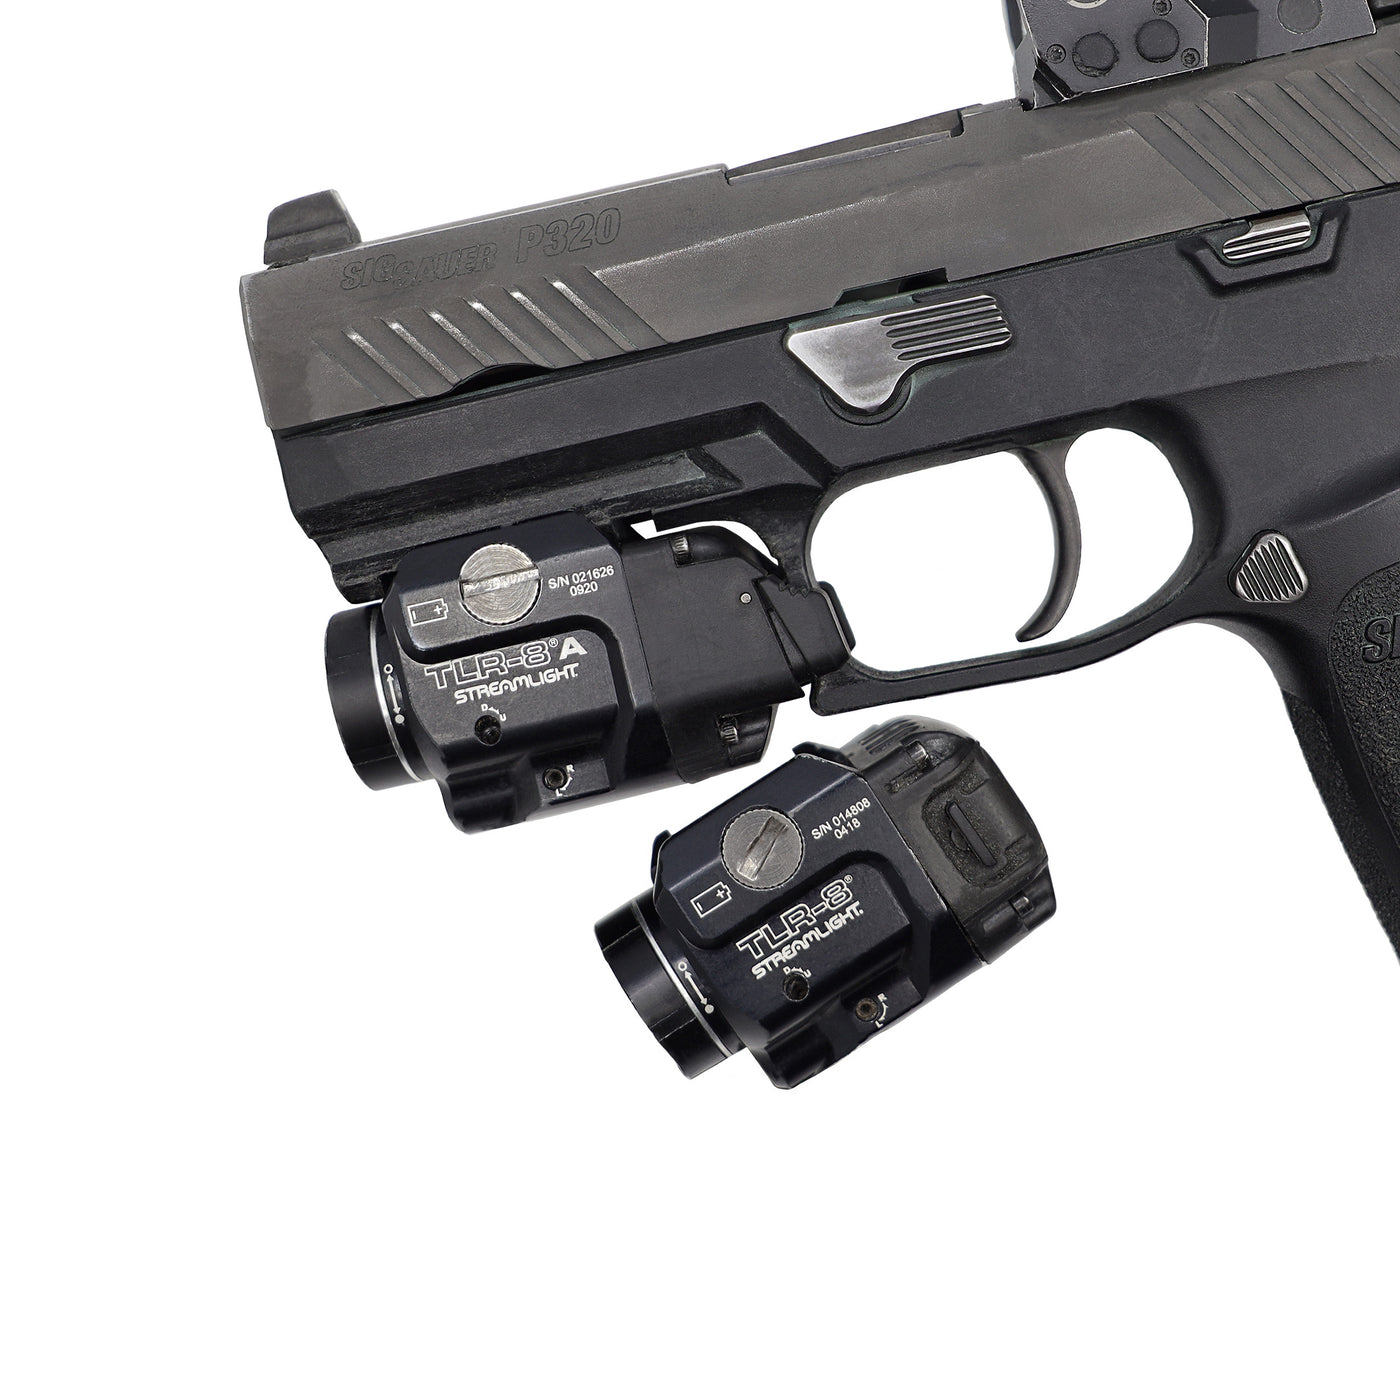 SIG P320/c firearm with streamlight TLR8 weapon light